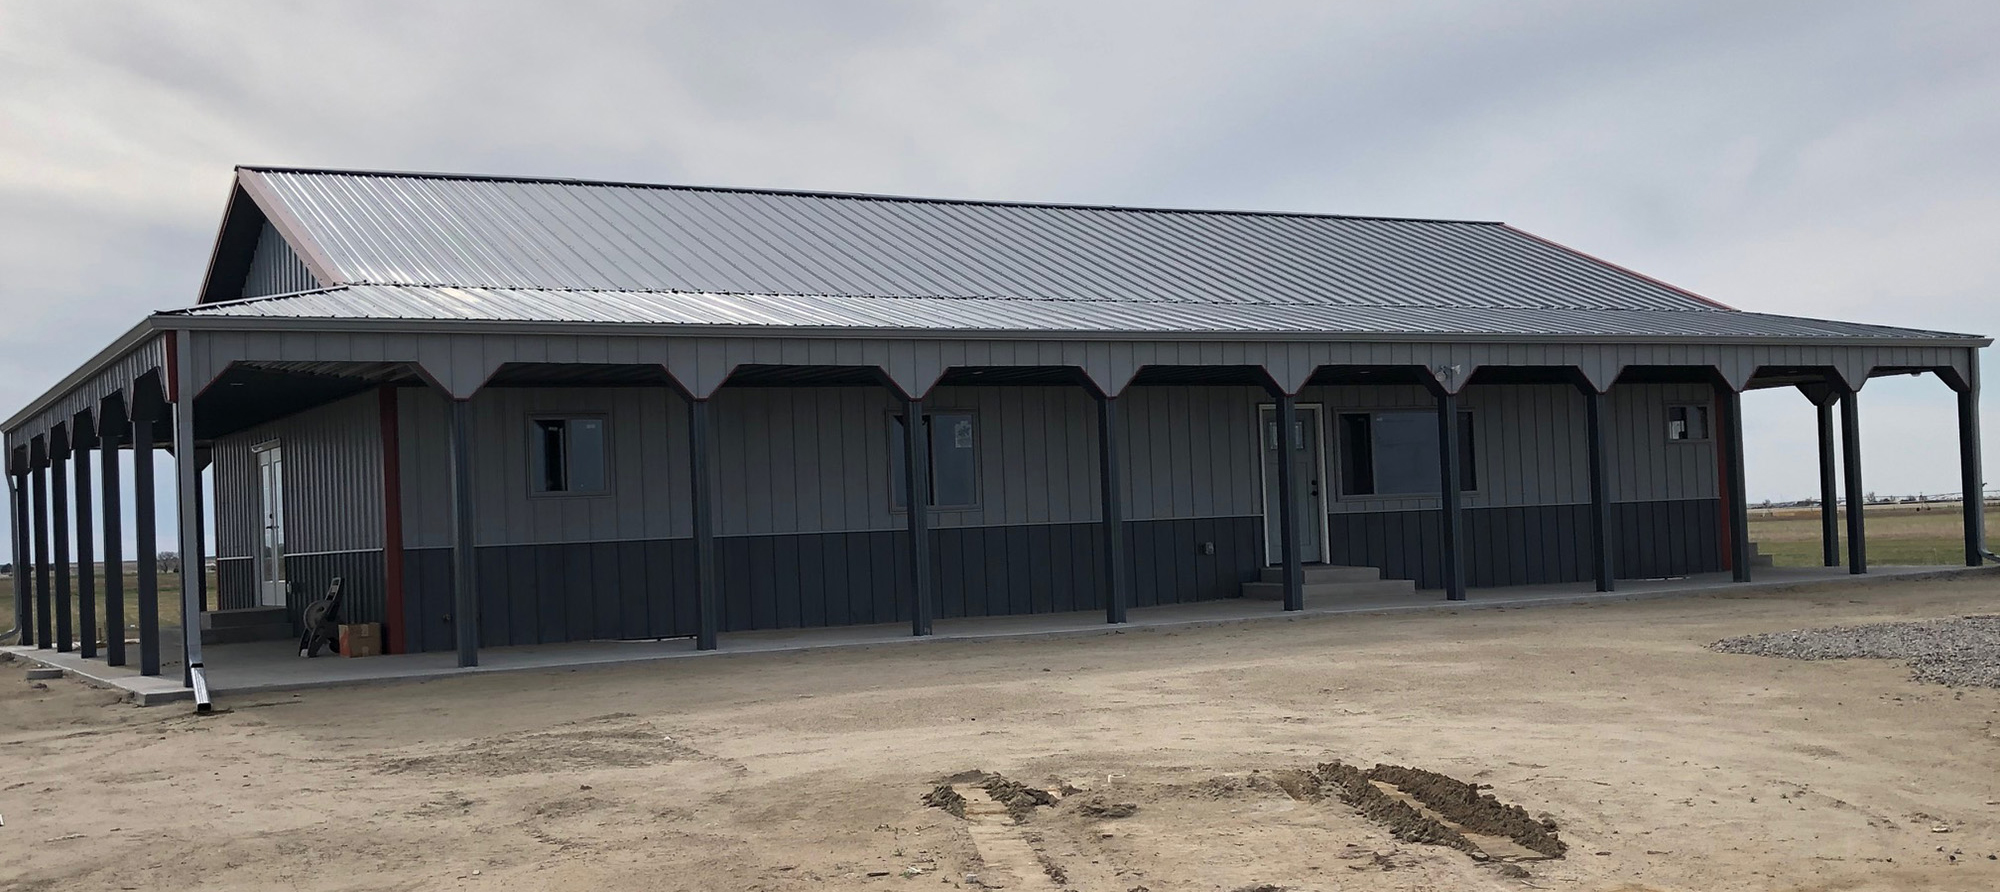 Fat Puppy Construction featured project of a post frame barndominium